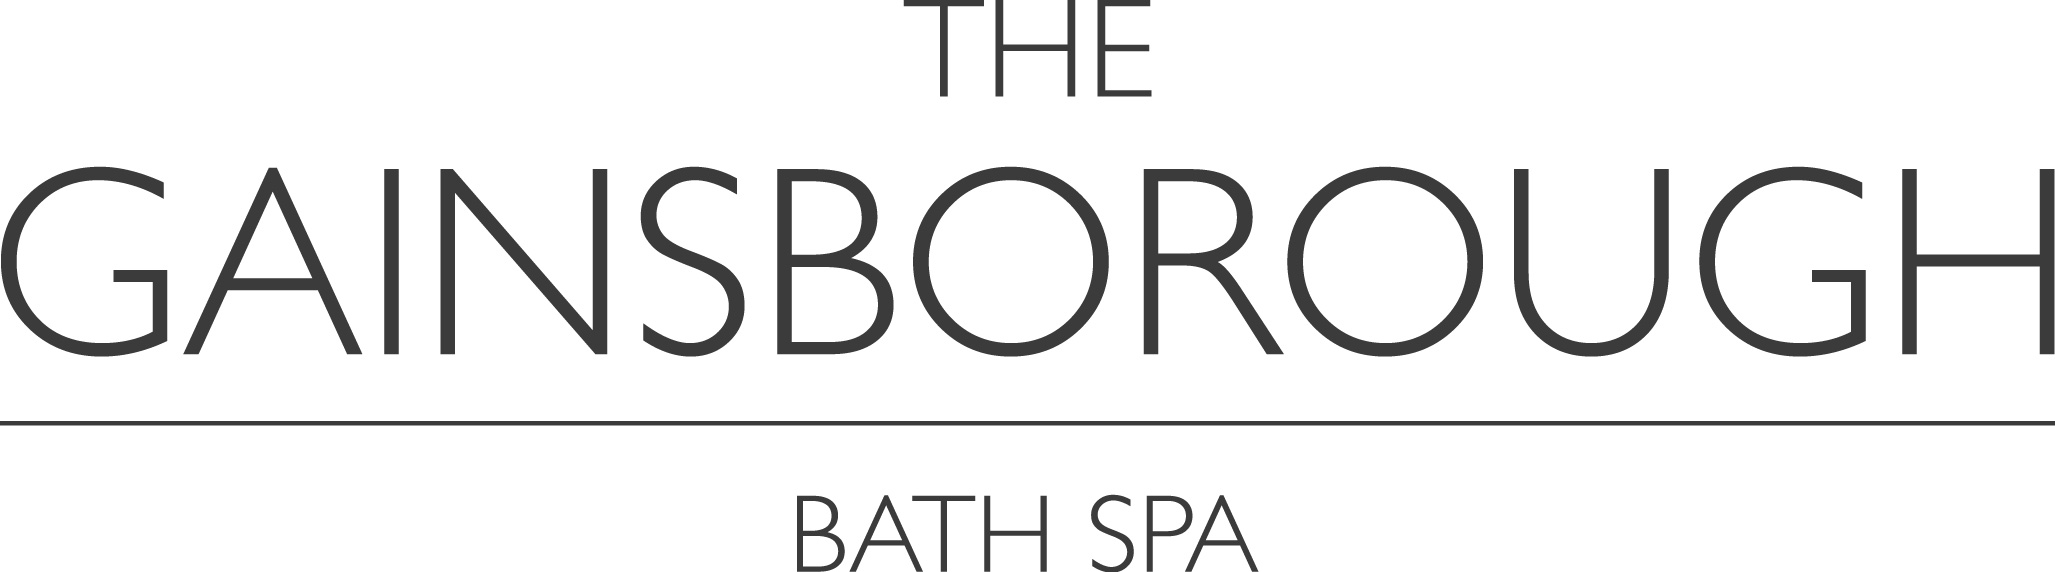 Image result for The Gainsborough Bath Spa